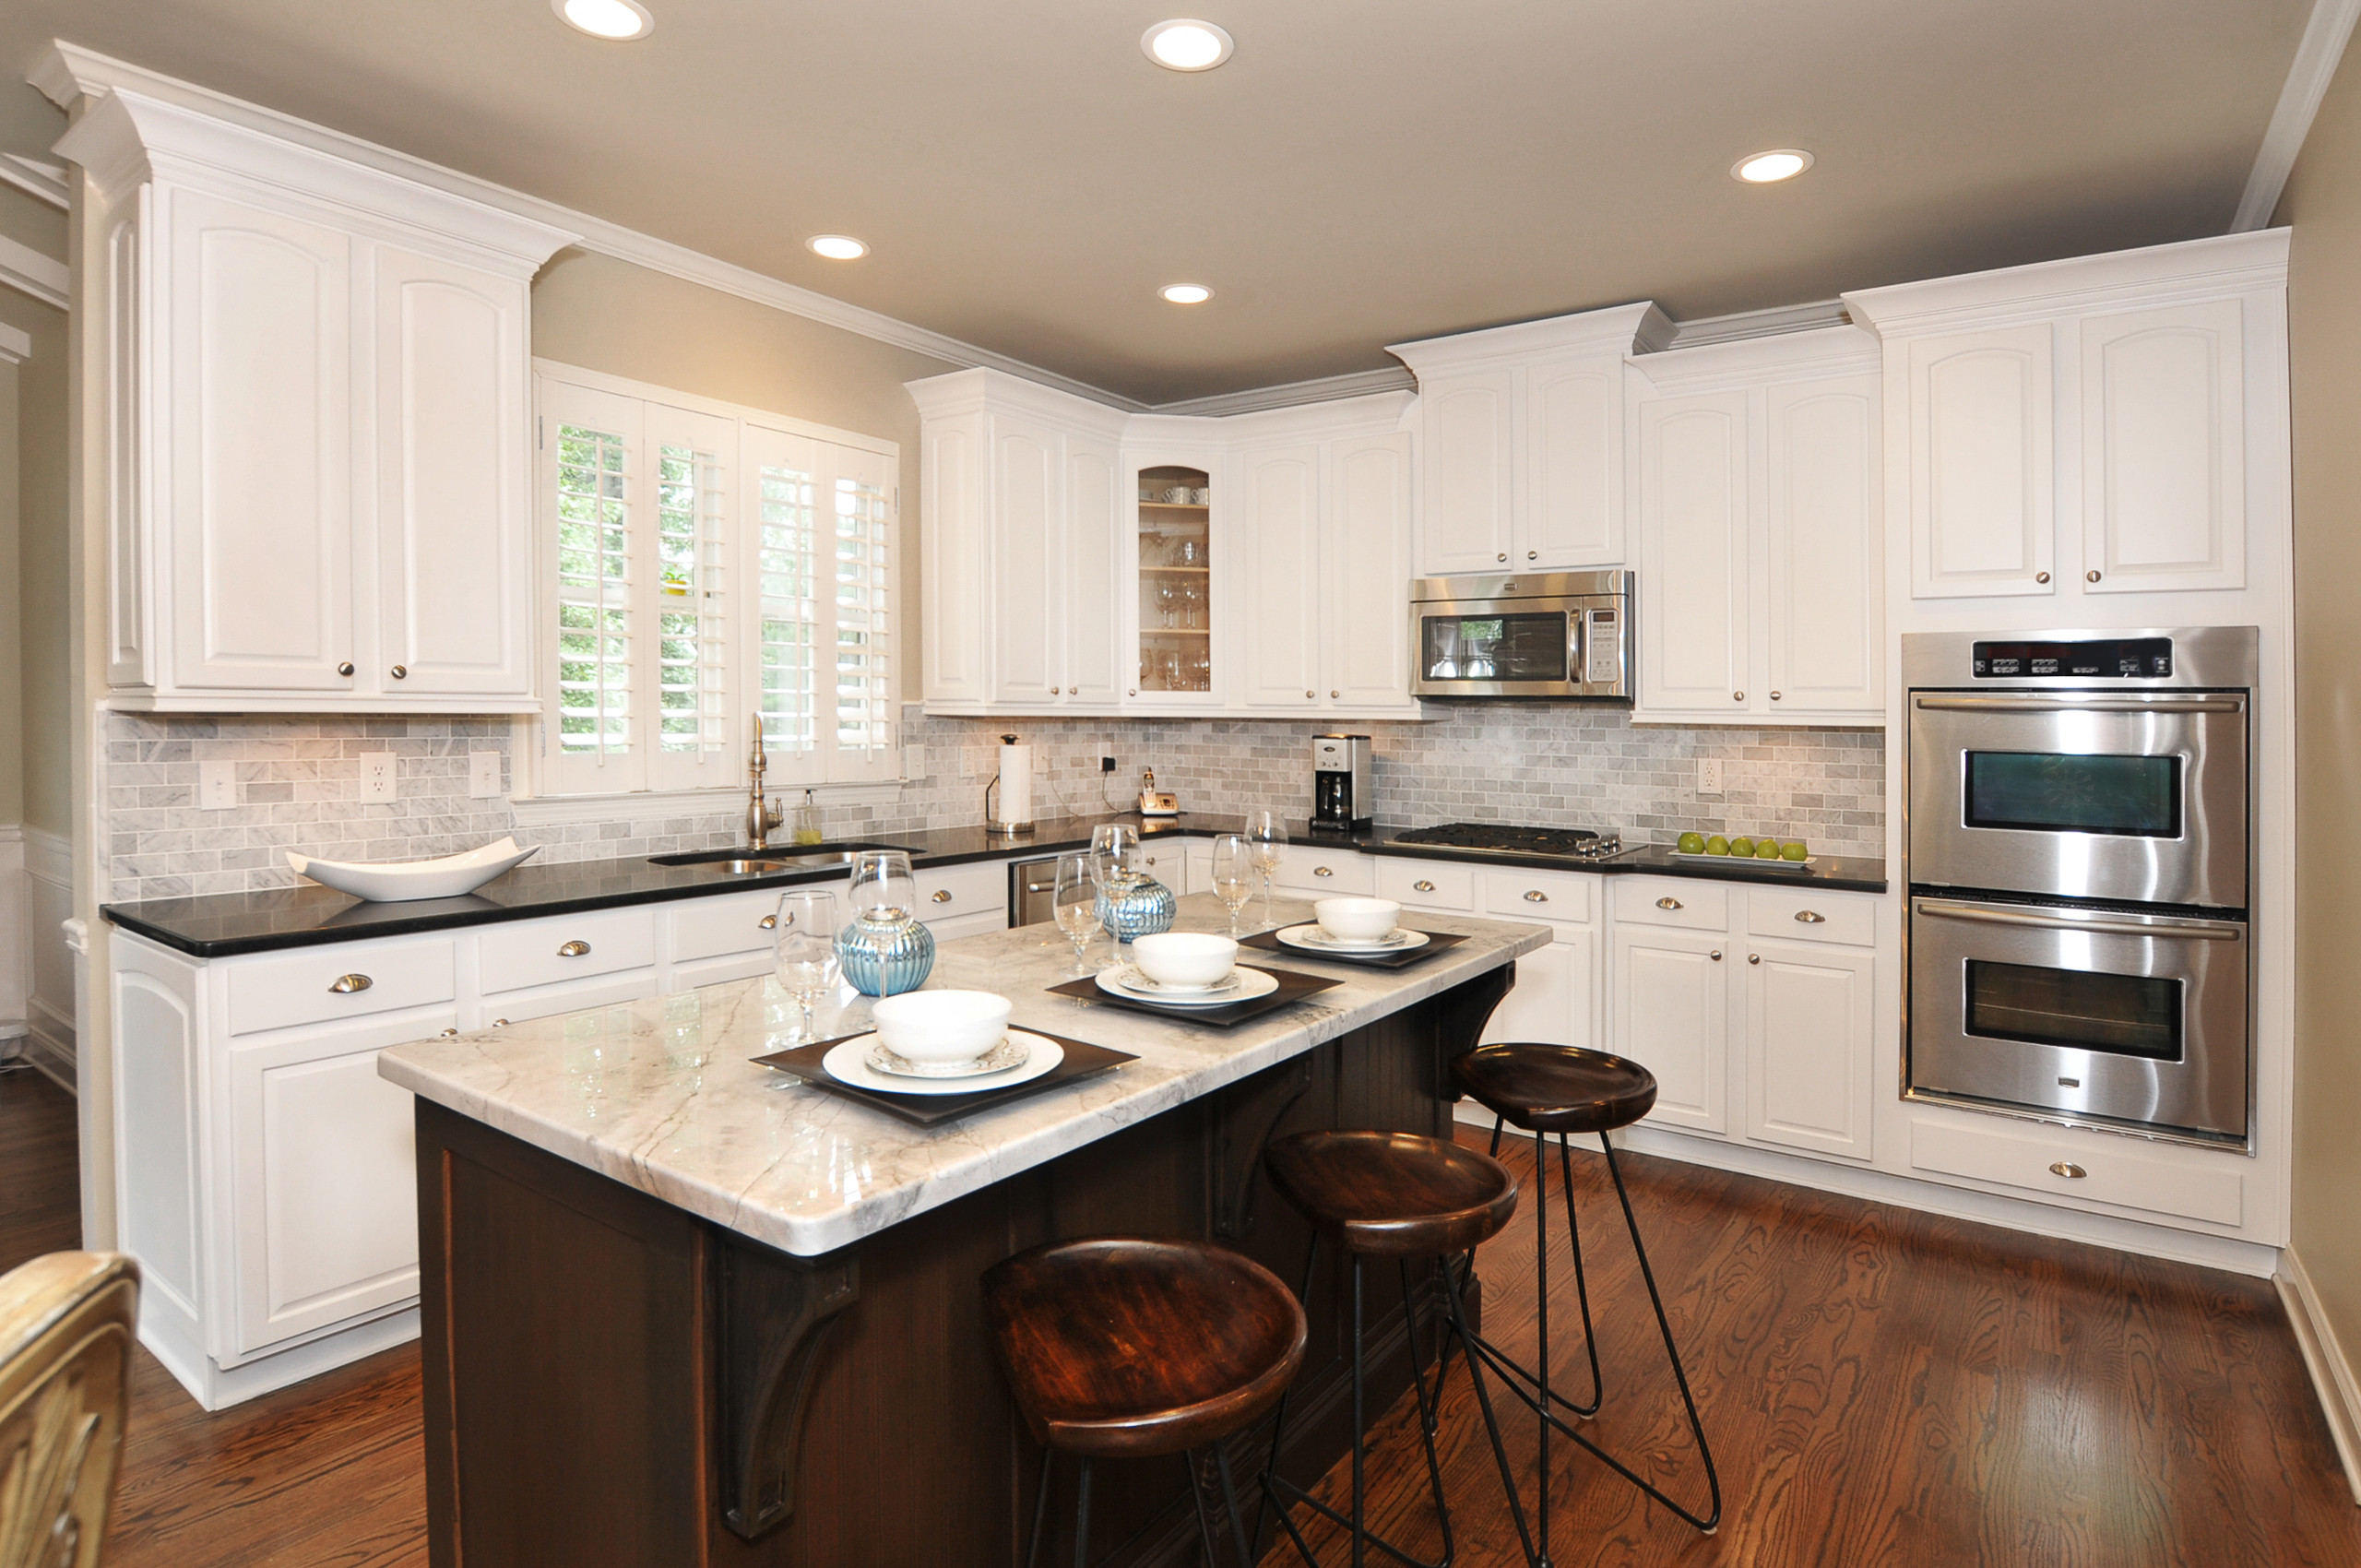 Canton Kitchen Cabinet Makeover From Maple To Off White Finish Traditional Kitchen Atlanta By Creative Cabinets And Fine Finishes Llc Houzz